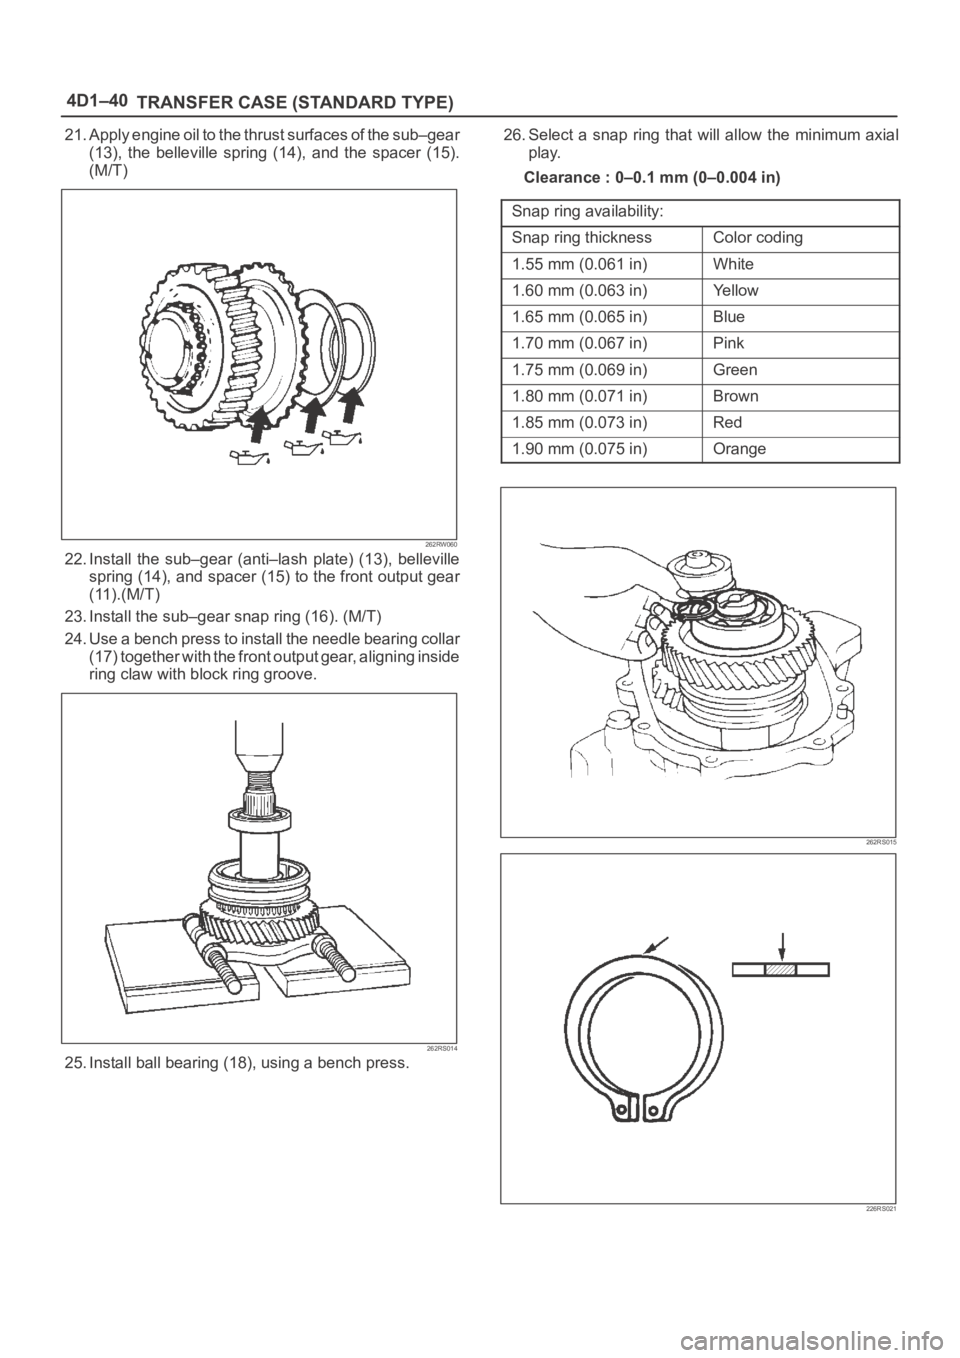 OPEL FRONTERA 1998  Workshop Manual 4D1–40
TRANSFER CASE (STANDARD TYPE)
21. Apply engine oil to the thrust surfaces of the sub–gear
(13),  the  belleville  spring  (14),  and  the  spacer  (15).
(M/T)
262RW060
22. Install  the  sub